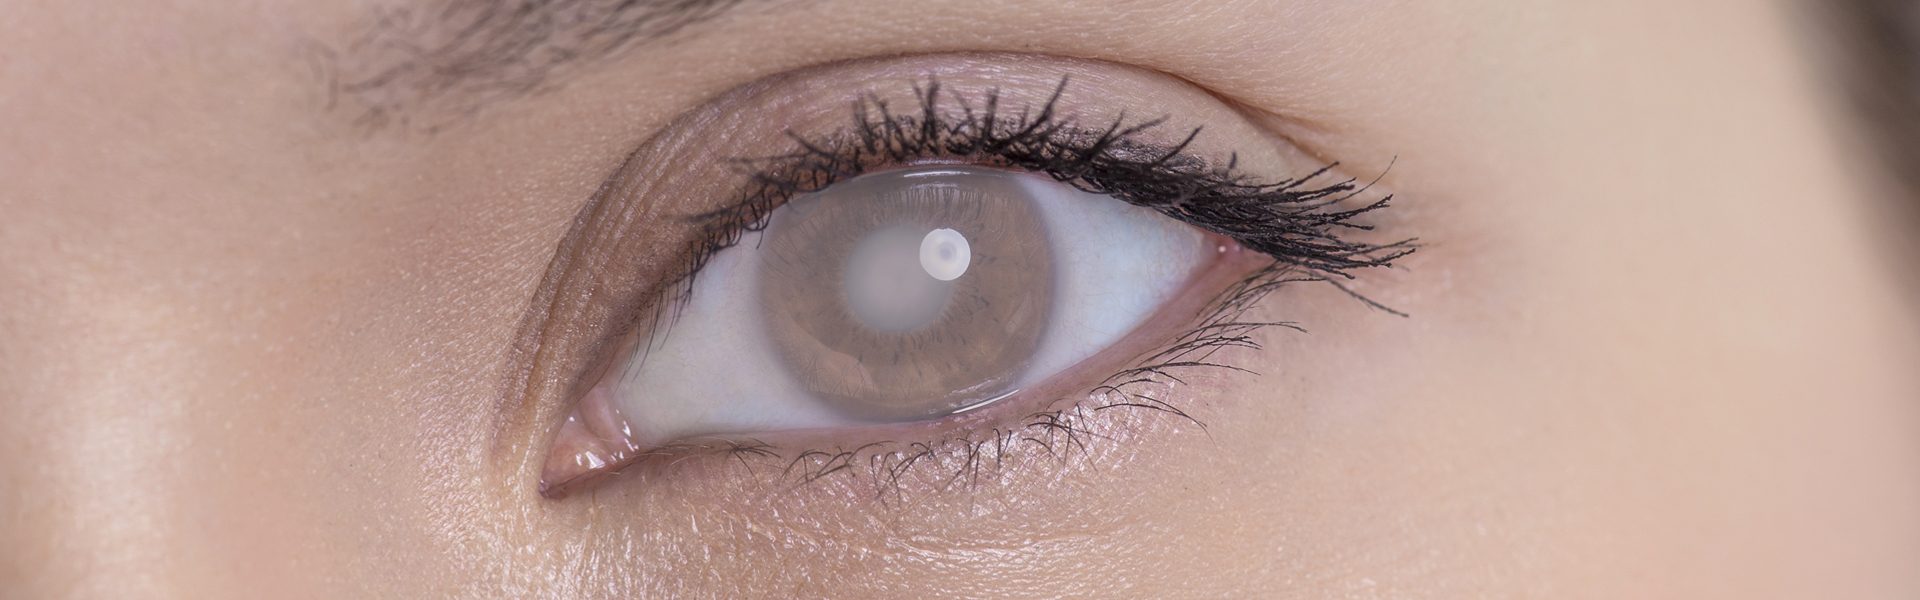 What You Should Know About Cataracts and Cataract Surgery